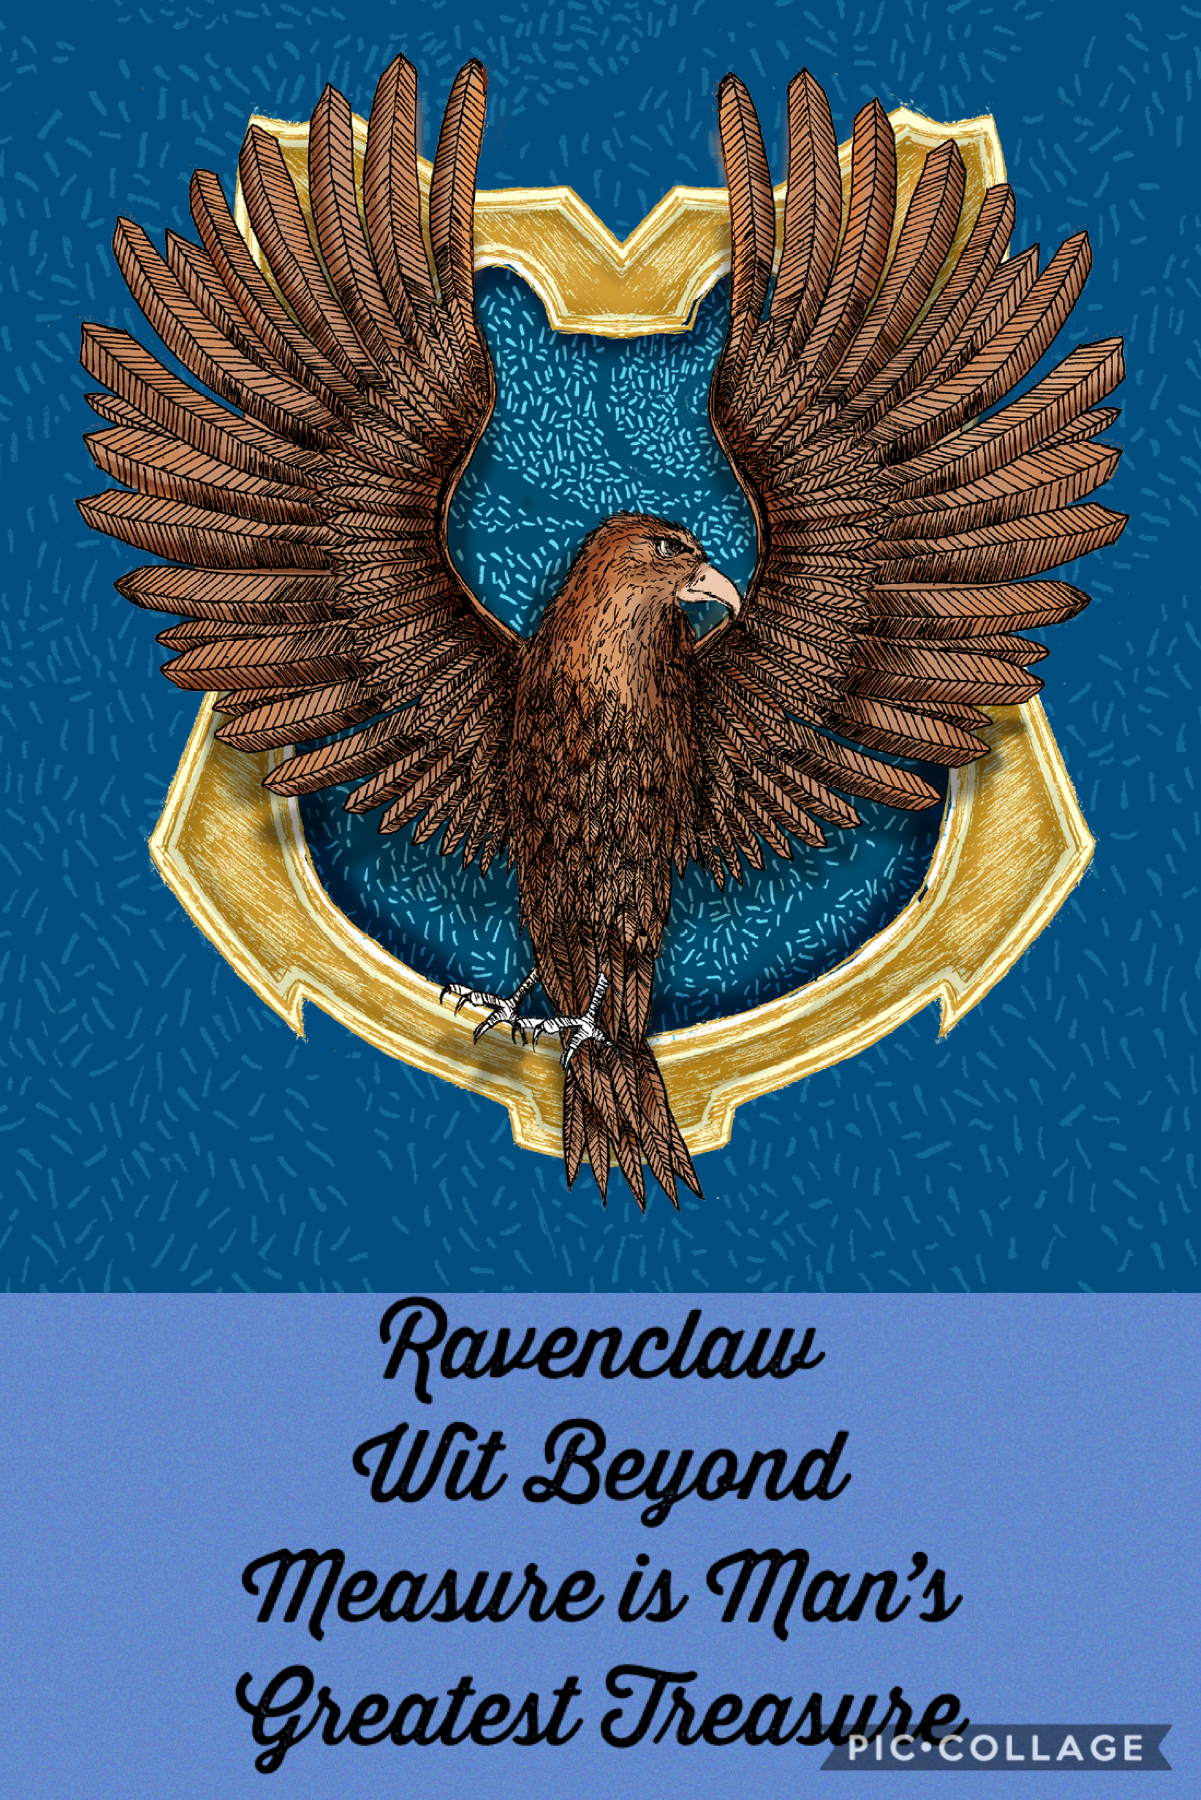 For all the Ravenclaws out there